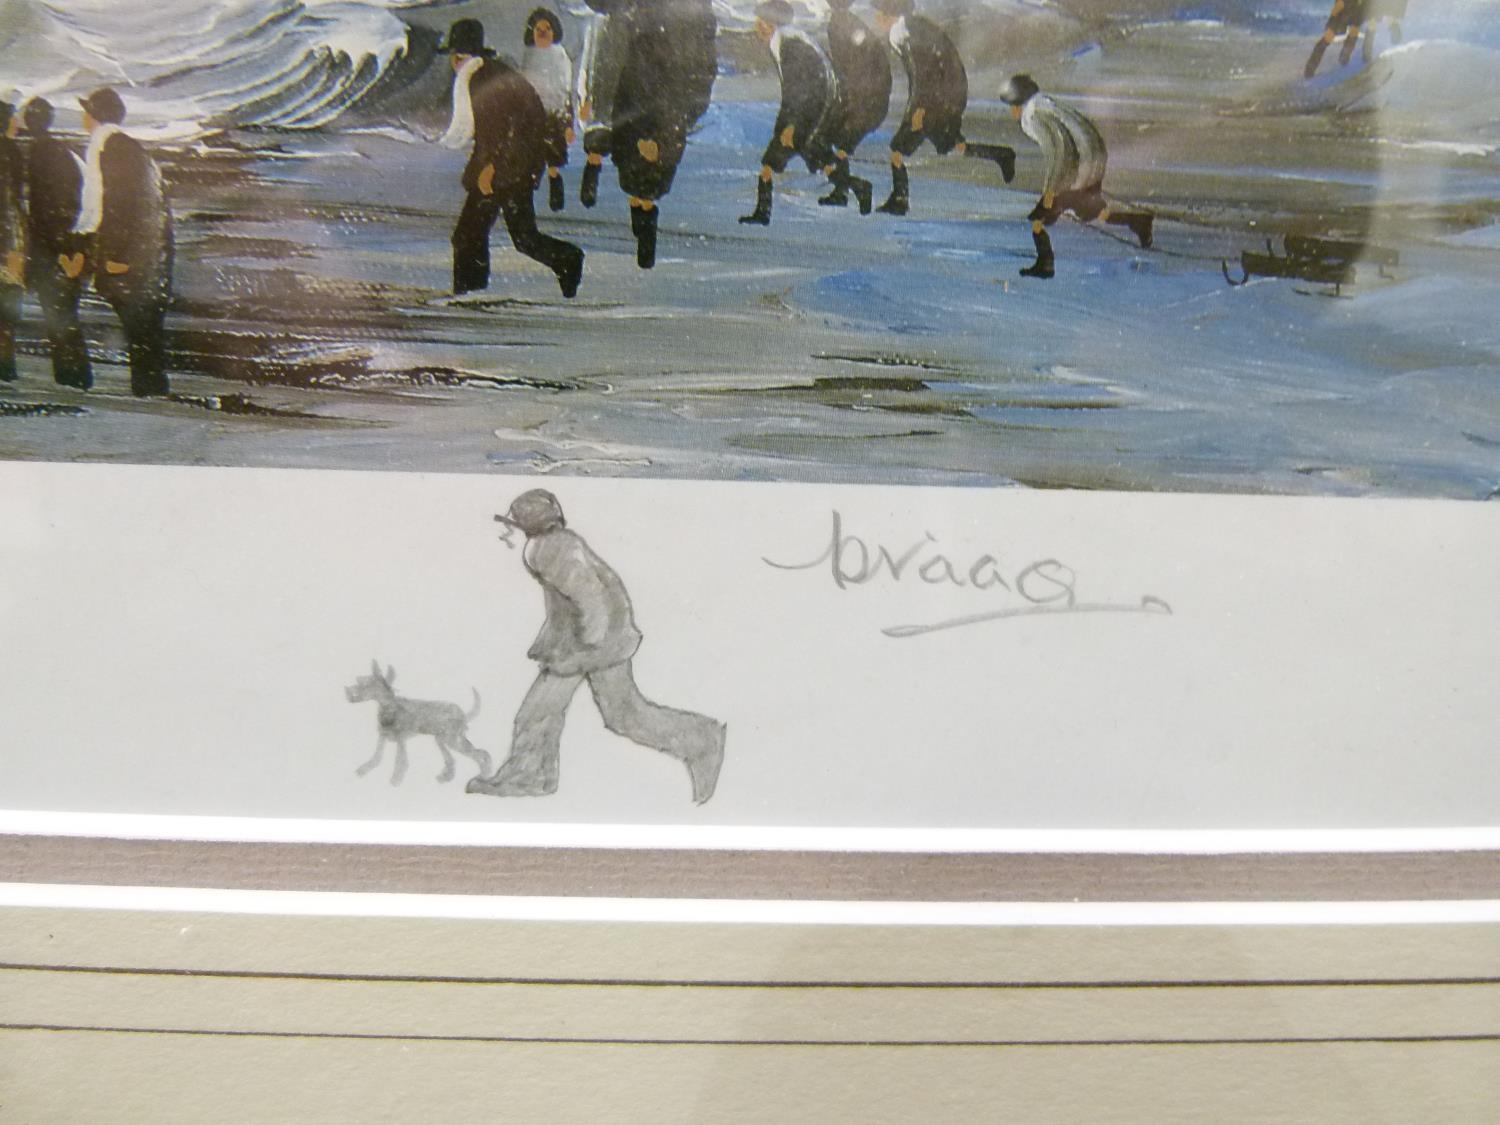 ARR Brian Shields 'Braaq' (1951-1997), Oi Was Baby Jesus Born 'Ere Dennis?, limited edition signed - Image 4 of 4